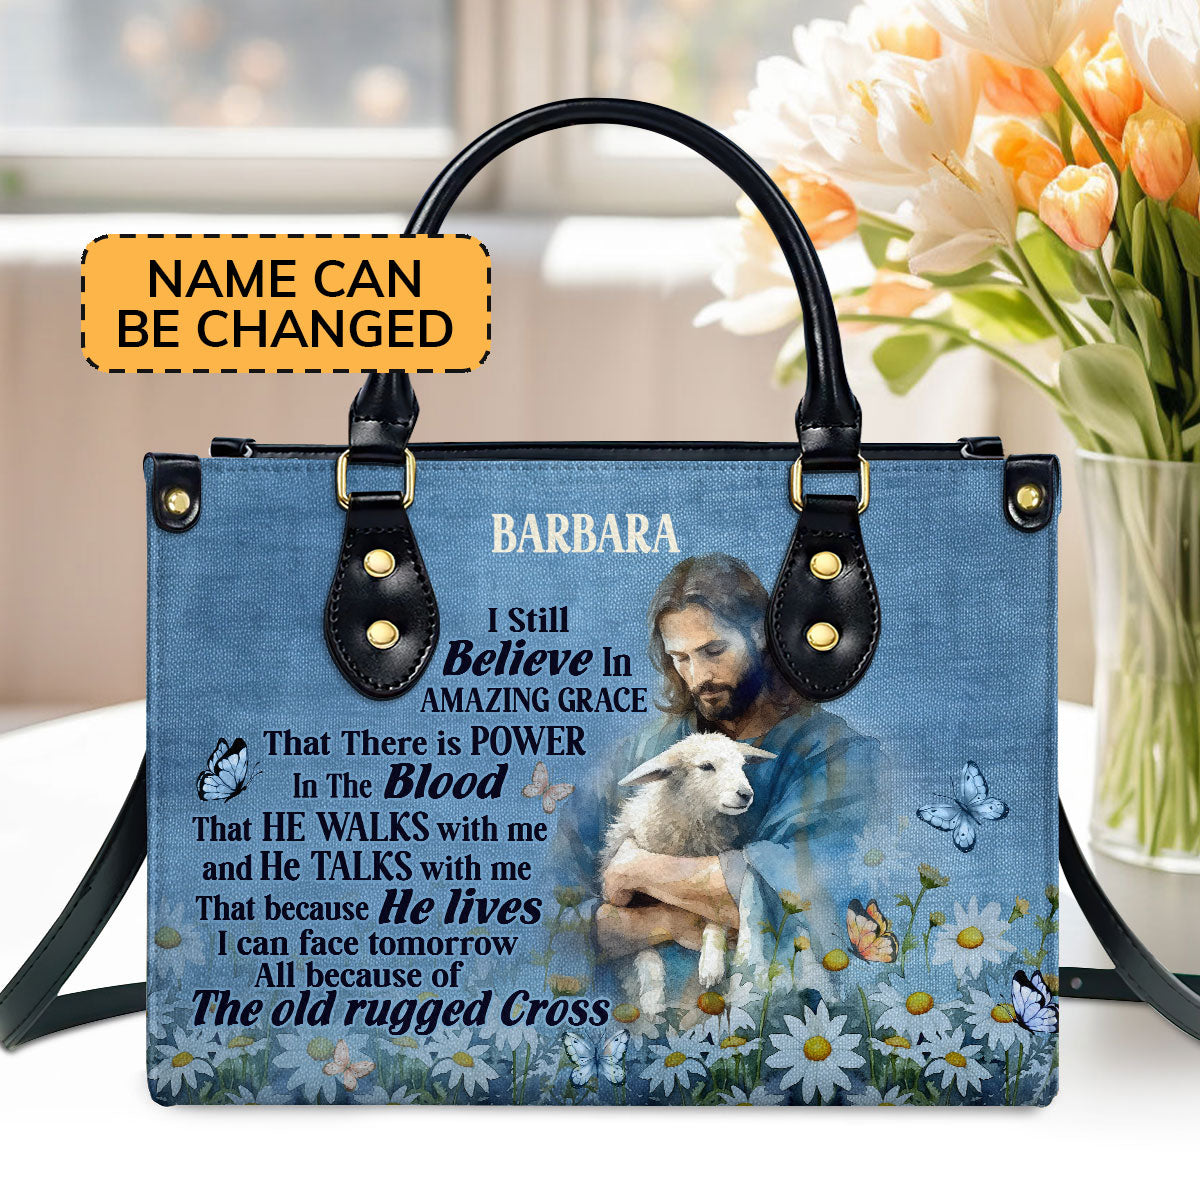 Jesus I Still Believe In Amazing Grace  Personalized Leather Handbag With Zipper - Inspirational Gift Christian Ladies